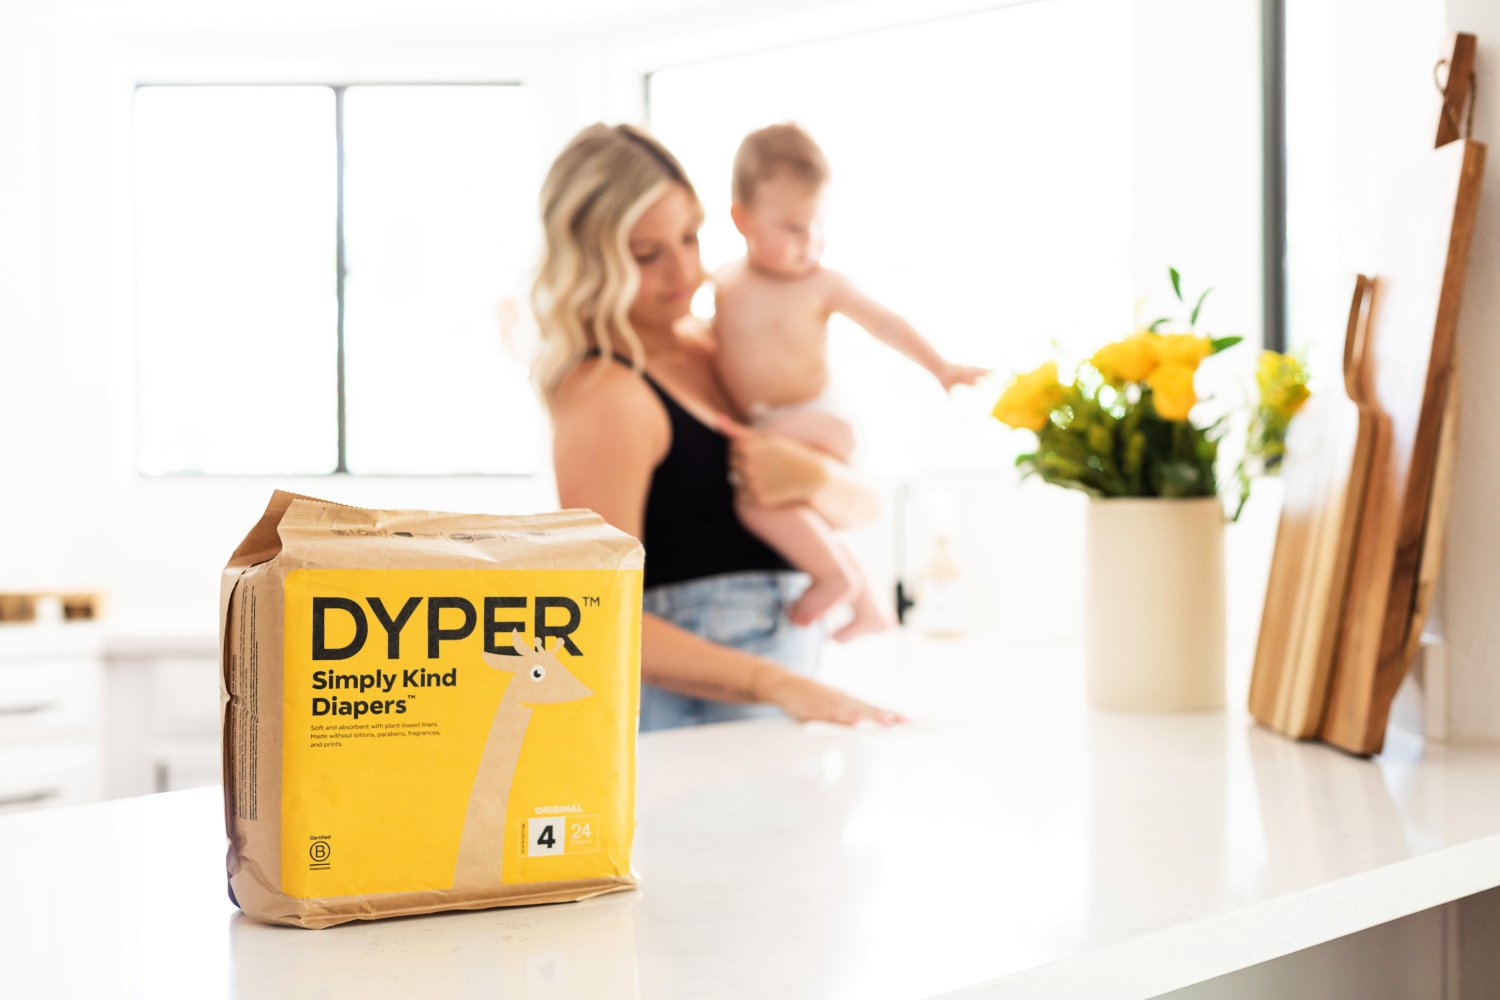 Dyper Announces Sustainable Improvements To Product and Packaging